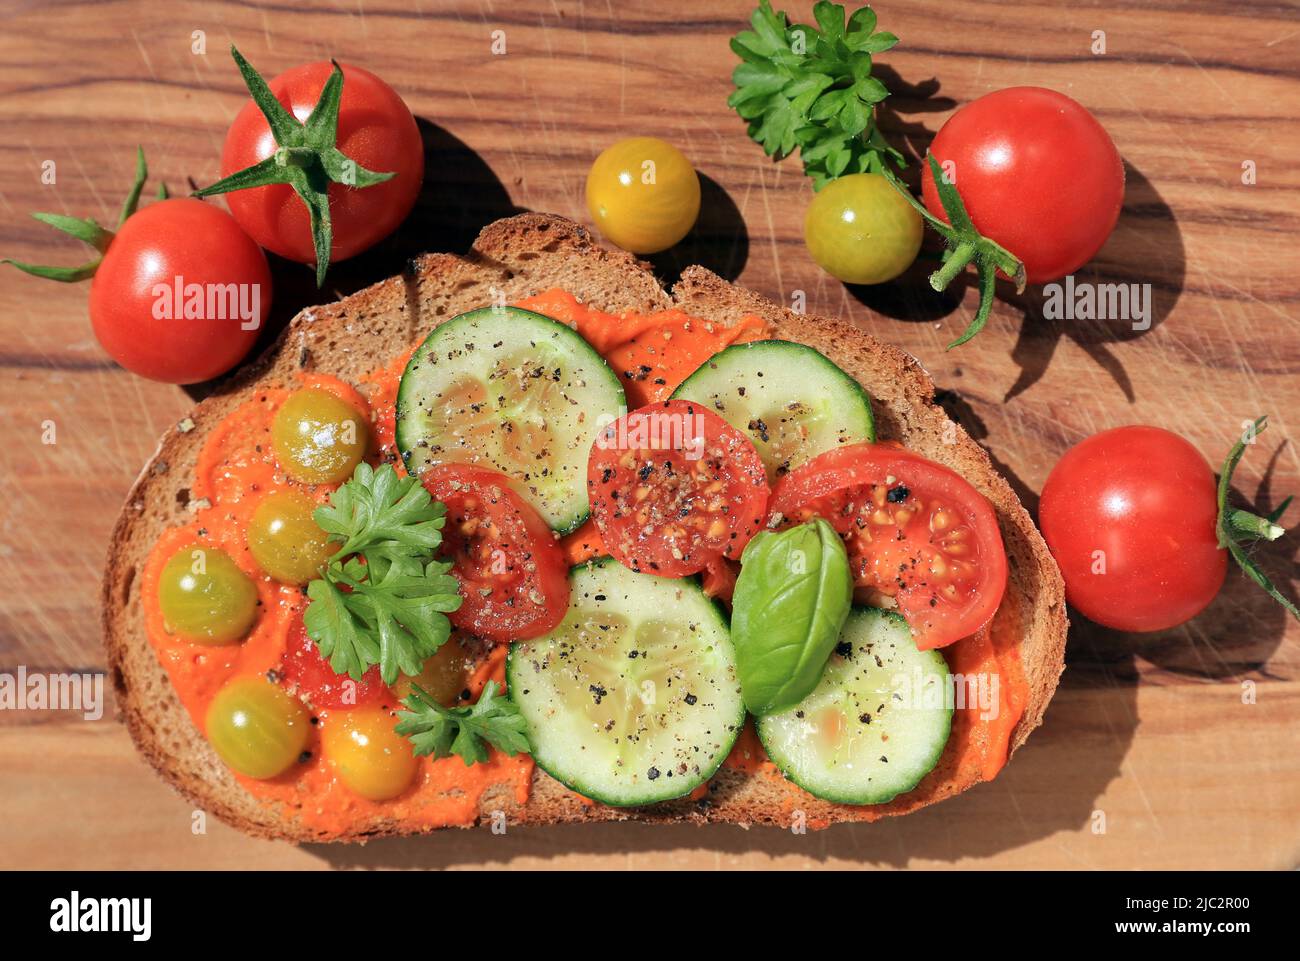 Fresh bread with cucumbers and tomatoes Stock Photo